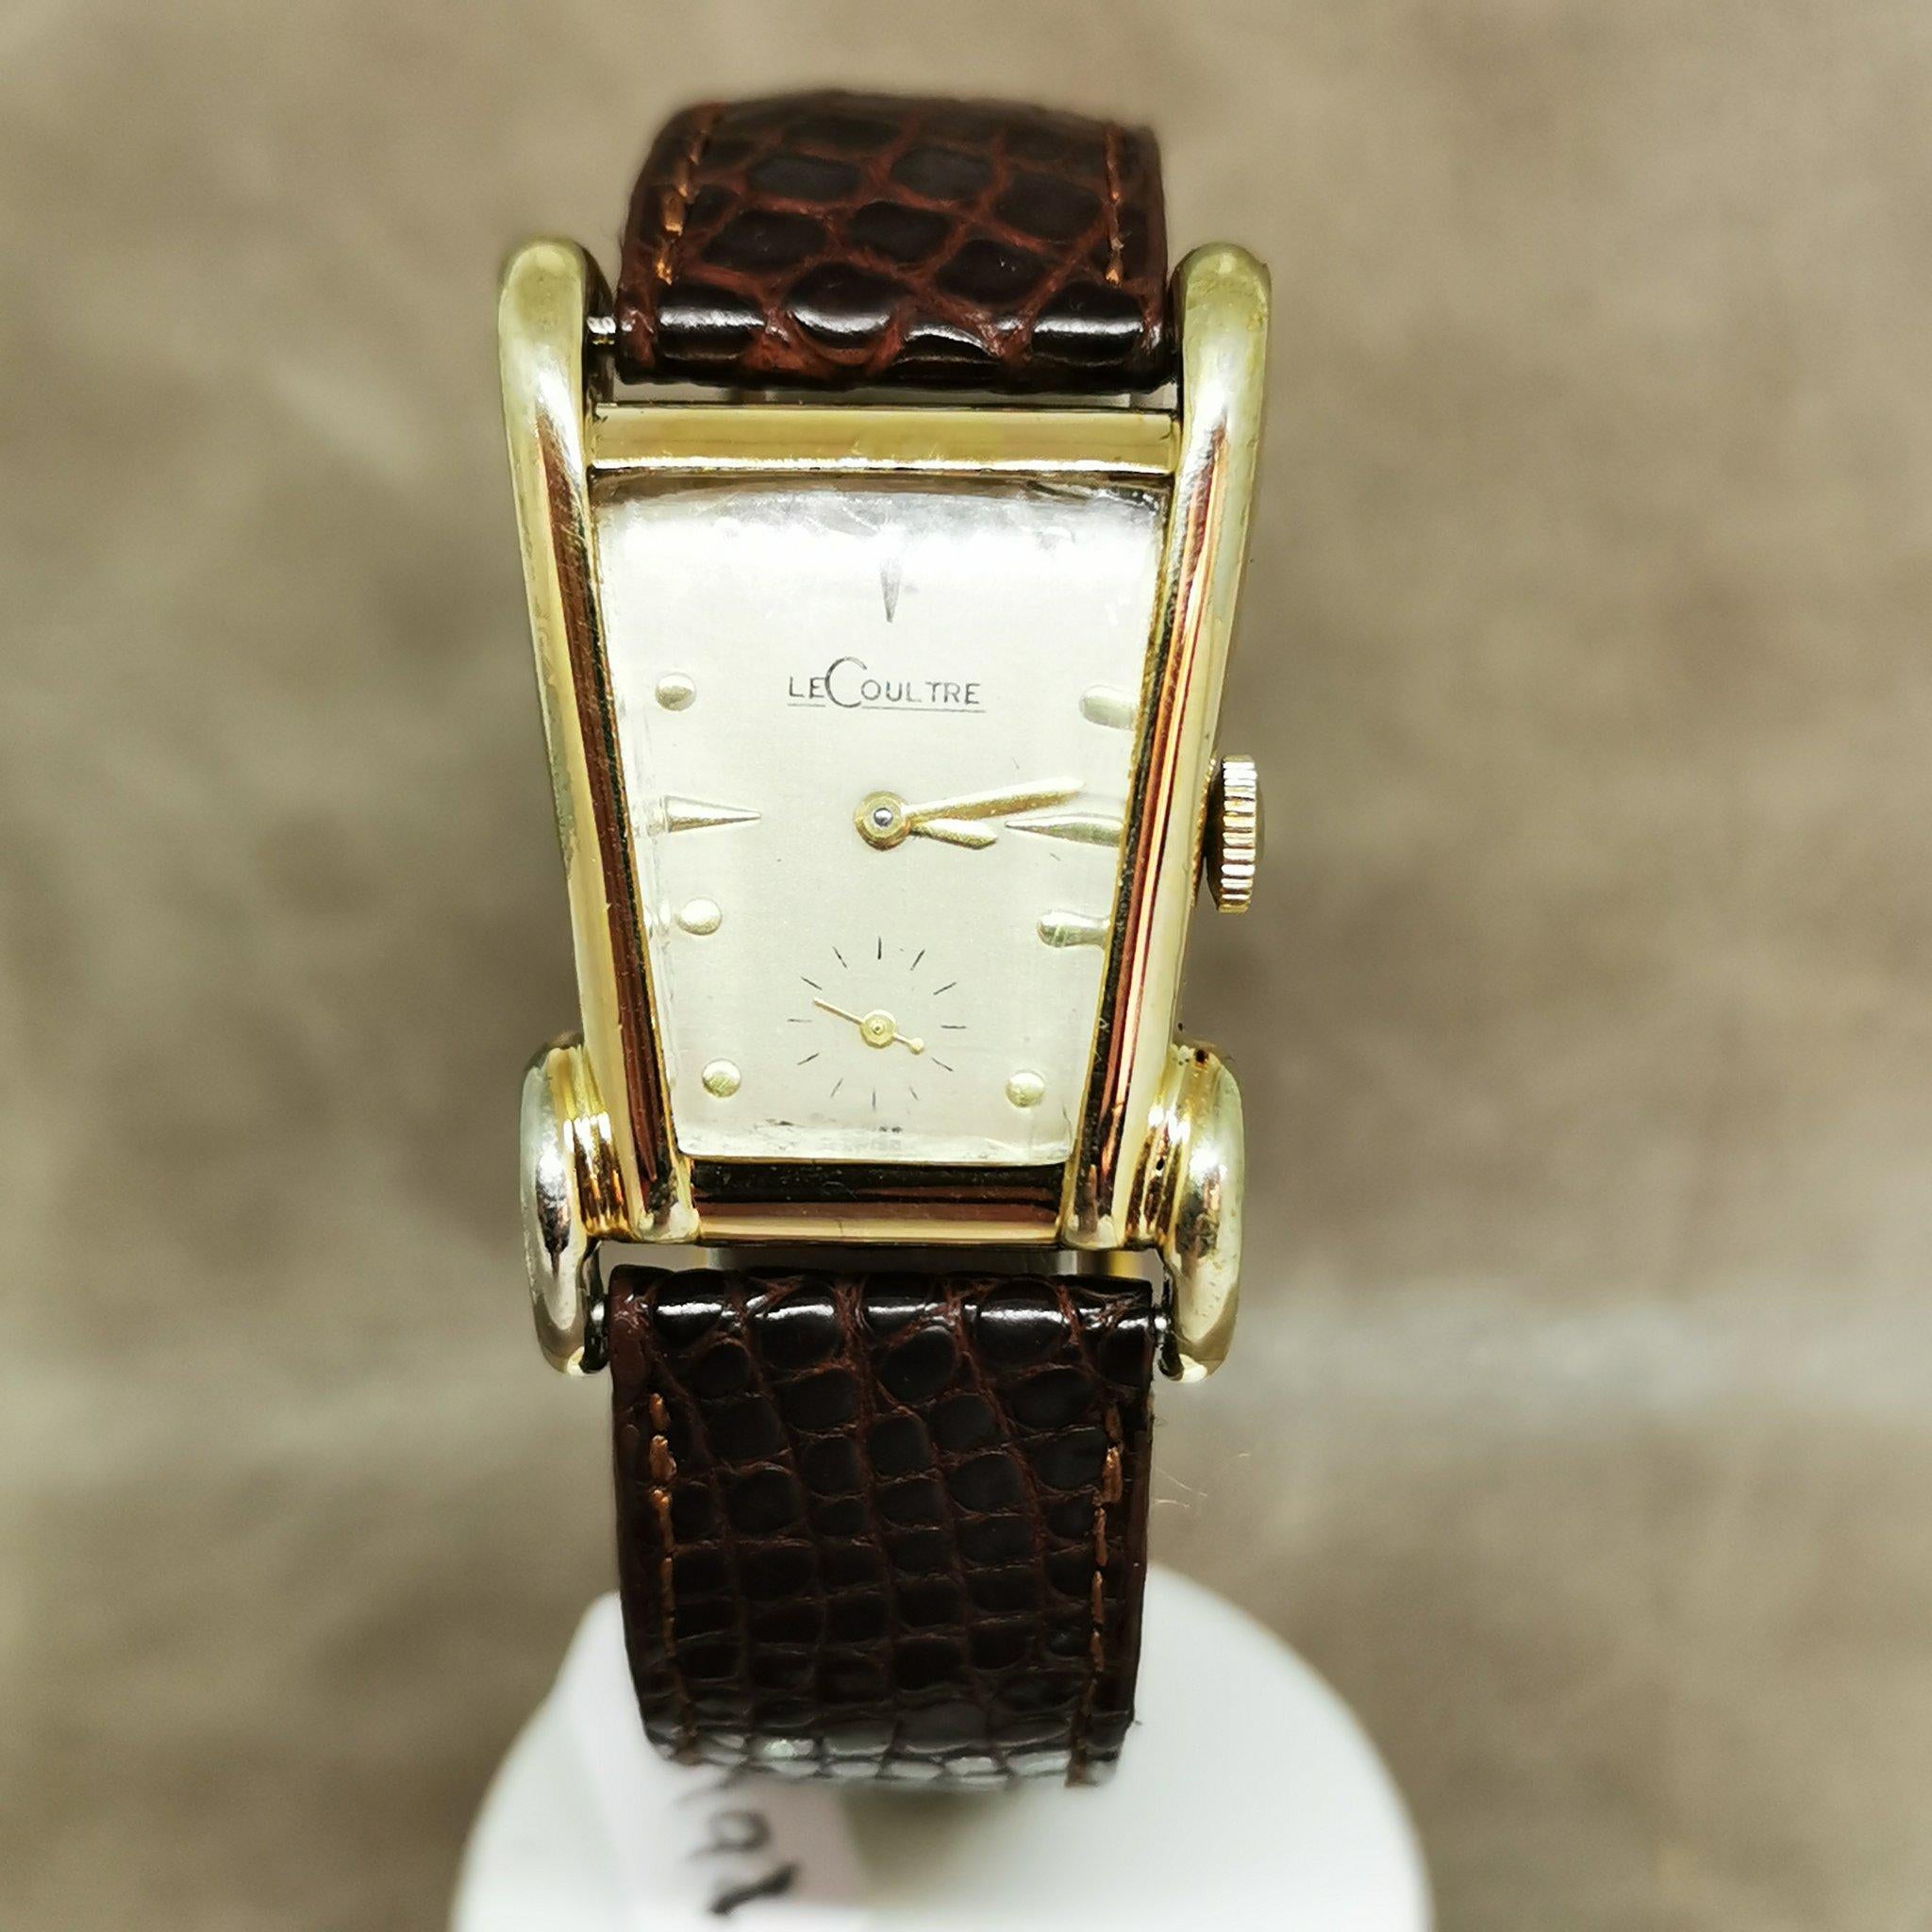 Manufacturer : Lecoultre
Model: aristocrat 
Year: 1952
Serial number: 65812
Material(s): 10-karat gold 
Dimensions: 28 x 26mm
Glass: Plexiglas
Lume: no
Calibre: lecoultre 60 hand-wound 
Bracelet / Strap: Alligator leather 
Width of the